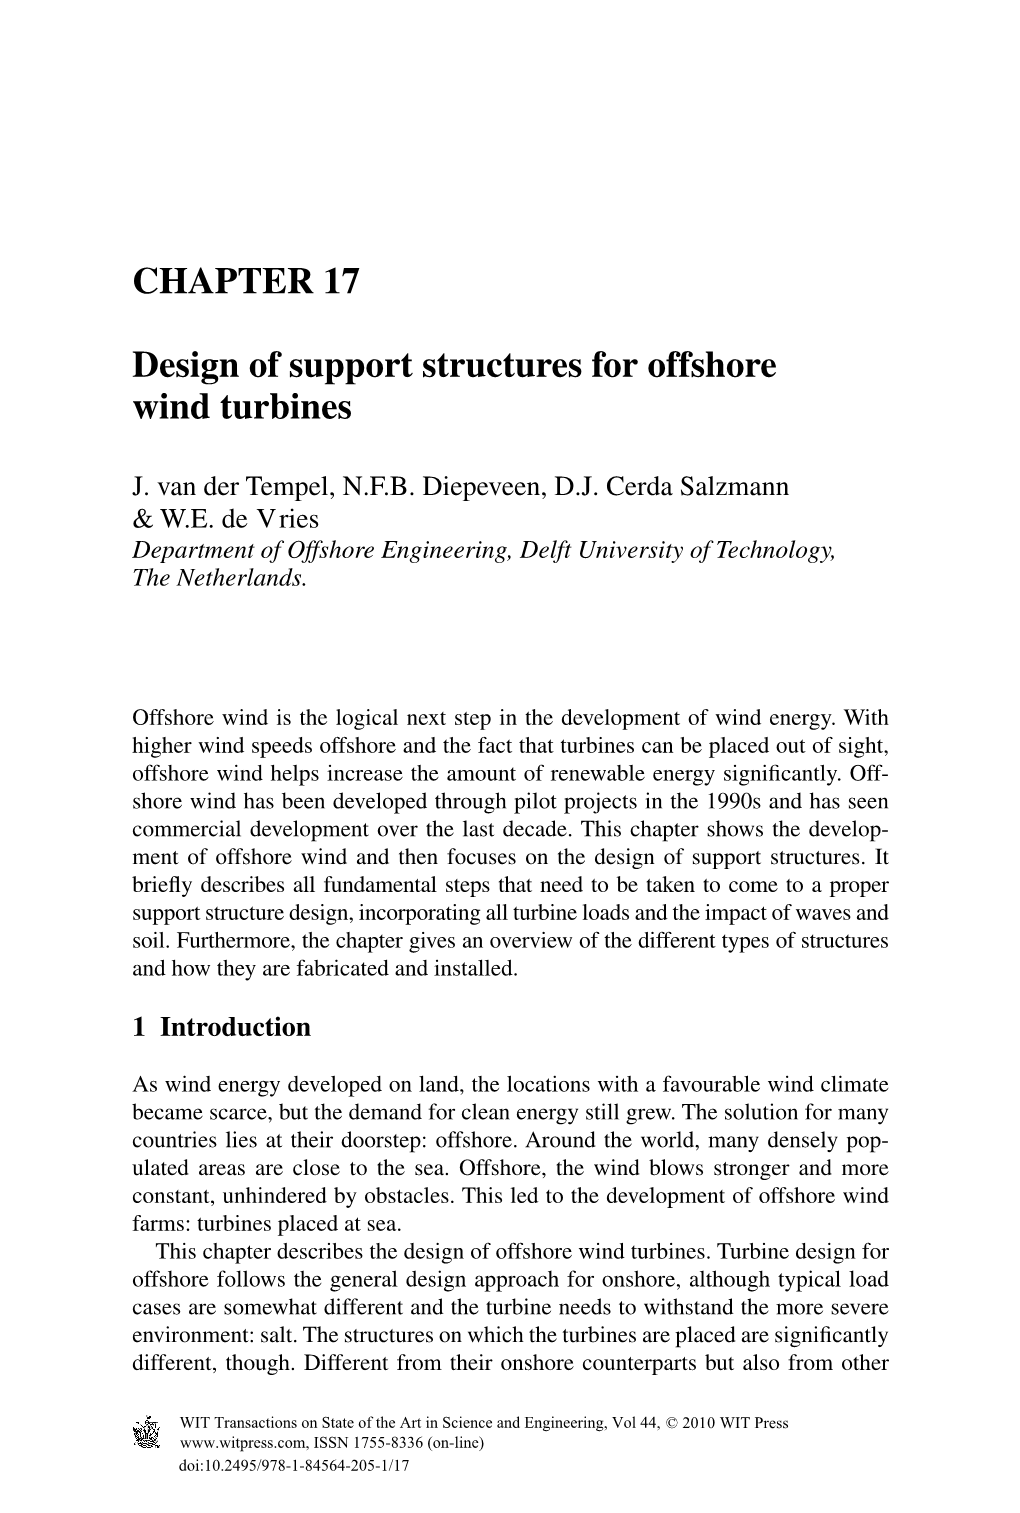 CHAPTER 17 Design of Support Structures for Offshore Wind Turbines